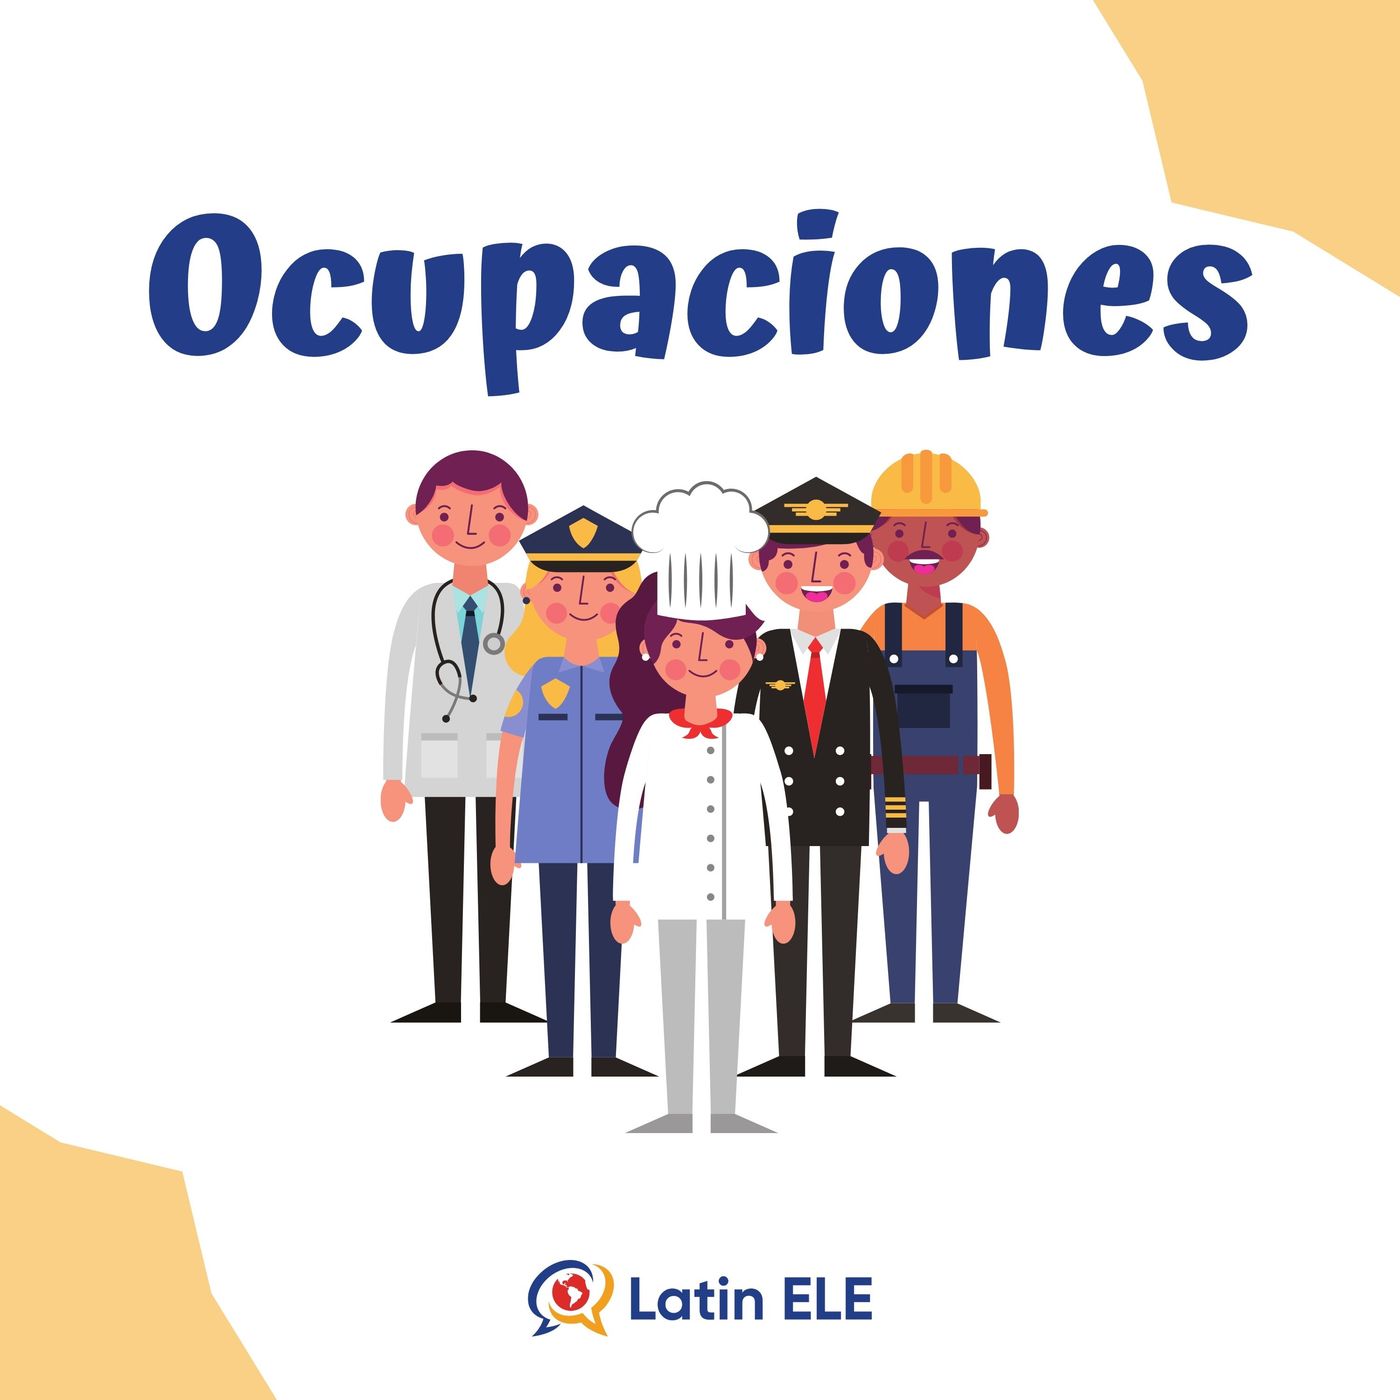 6. Talking about Occupations in Spanish (Ocupaciones)